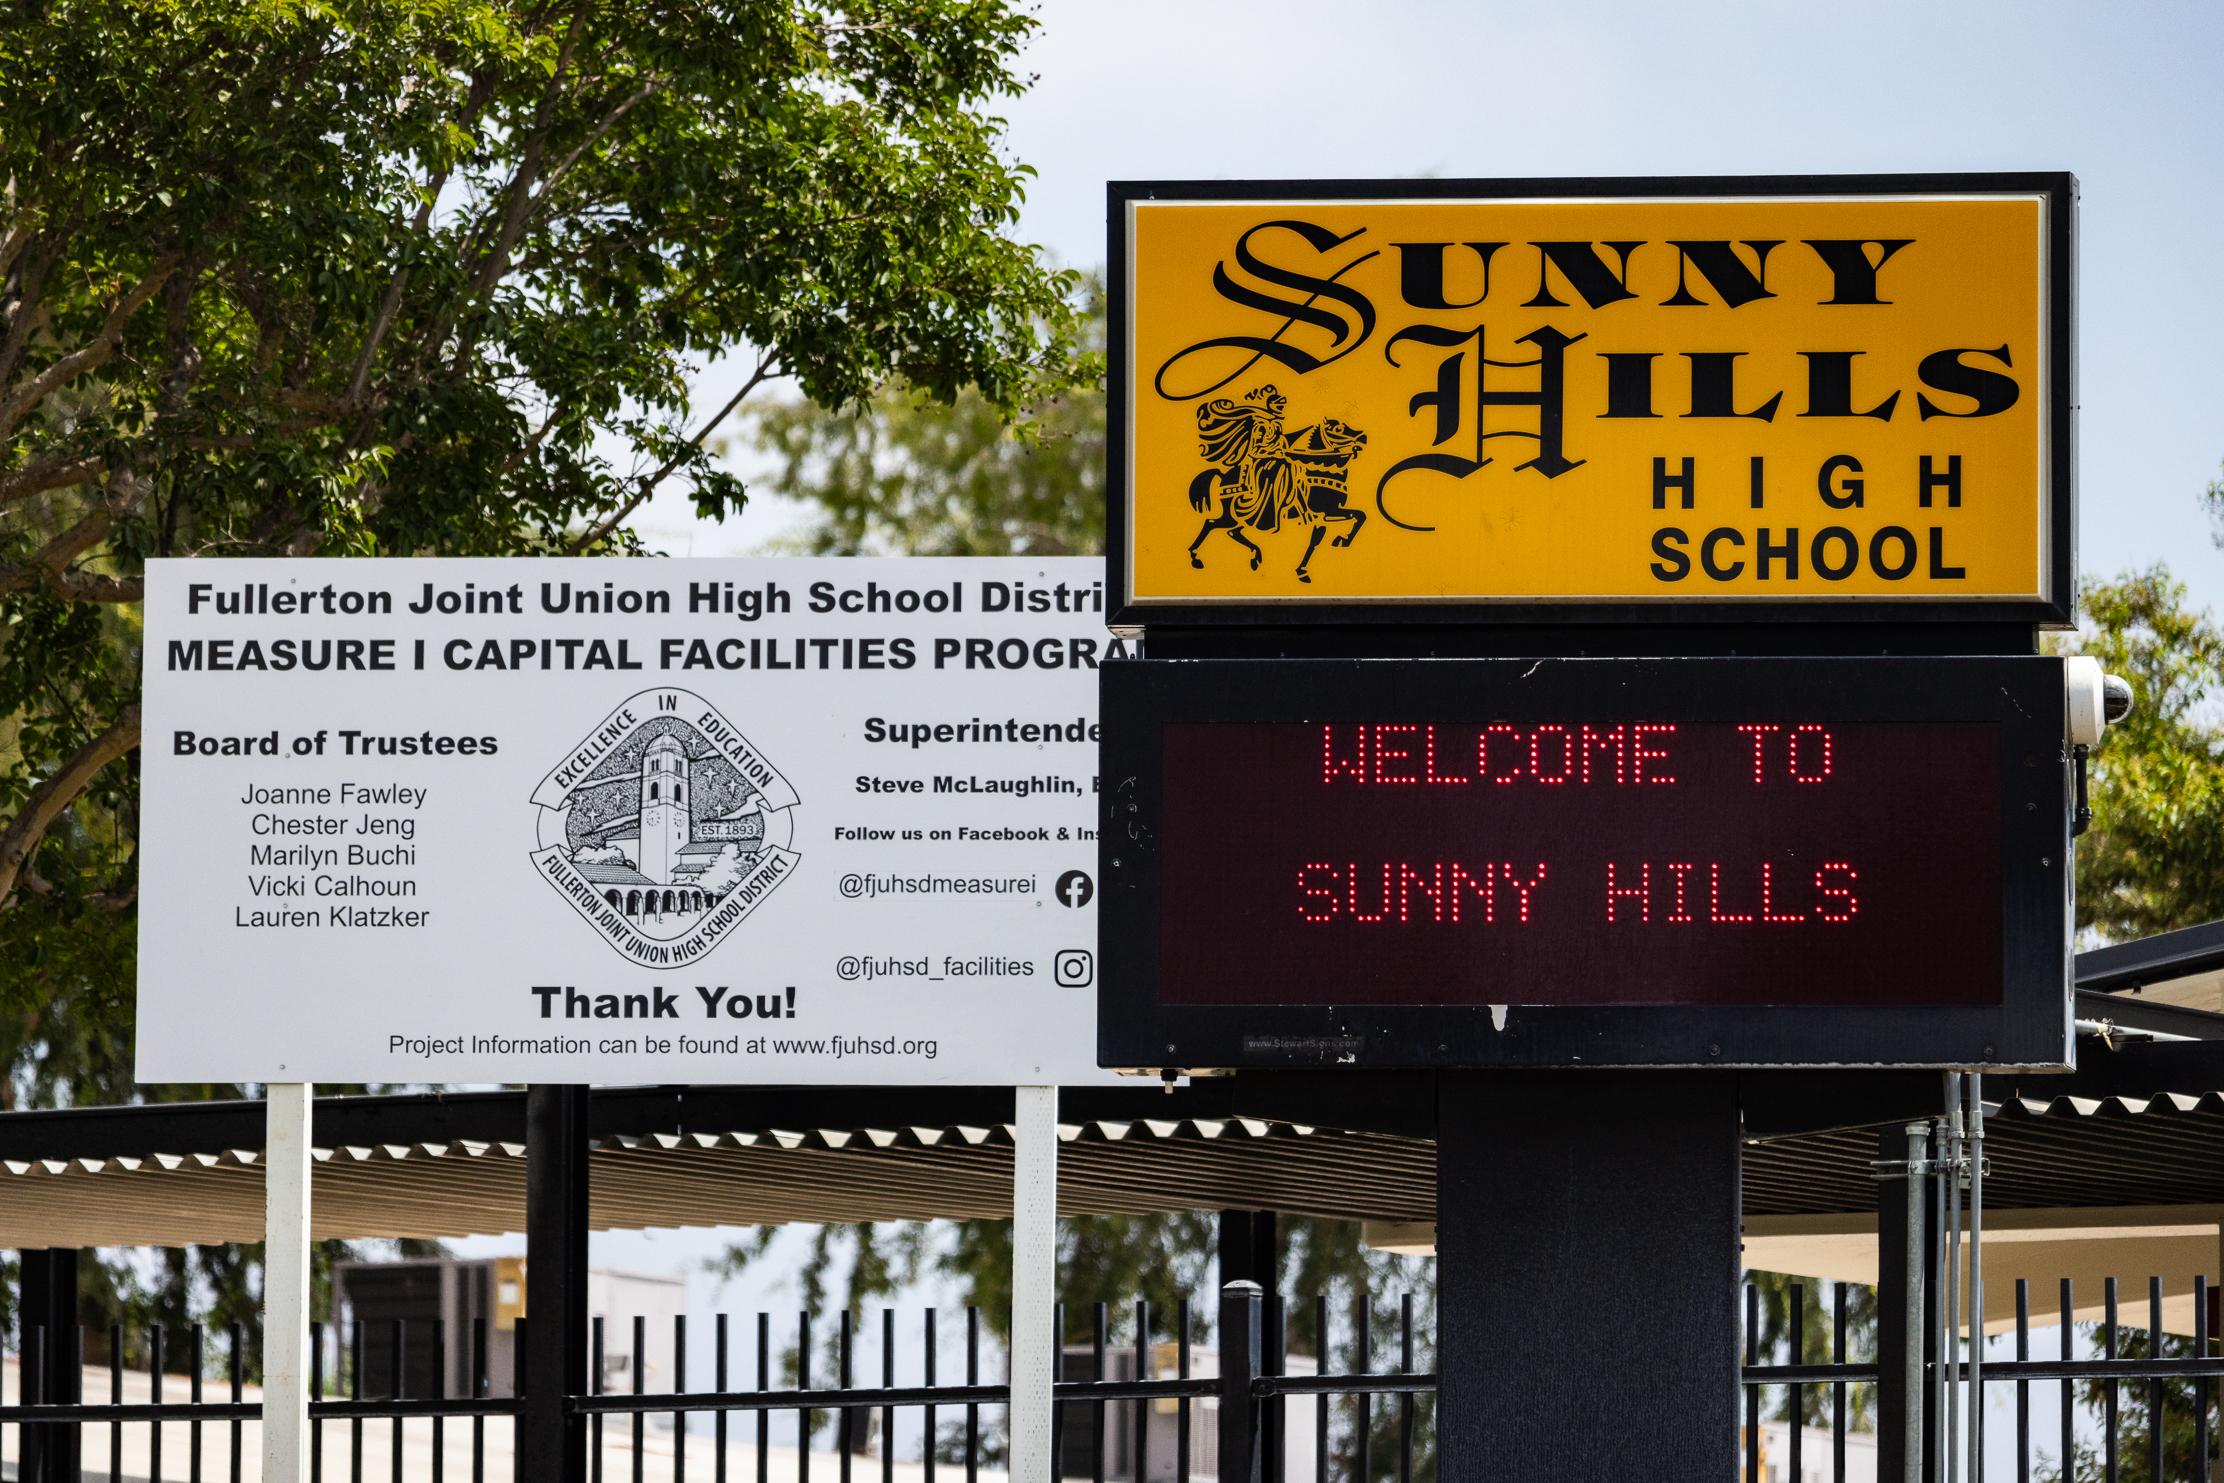 New Football Coach Sees Similarities Between San Clemente and Sunny Hills